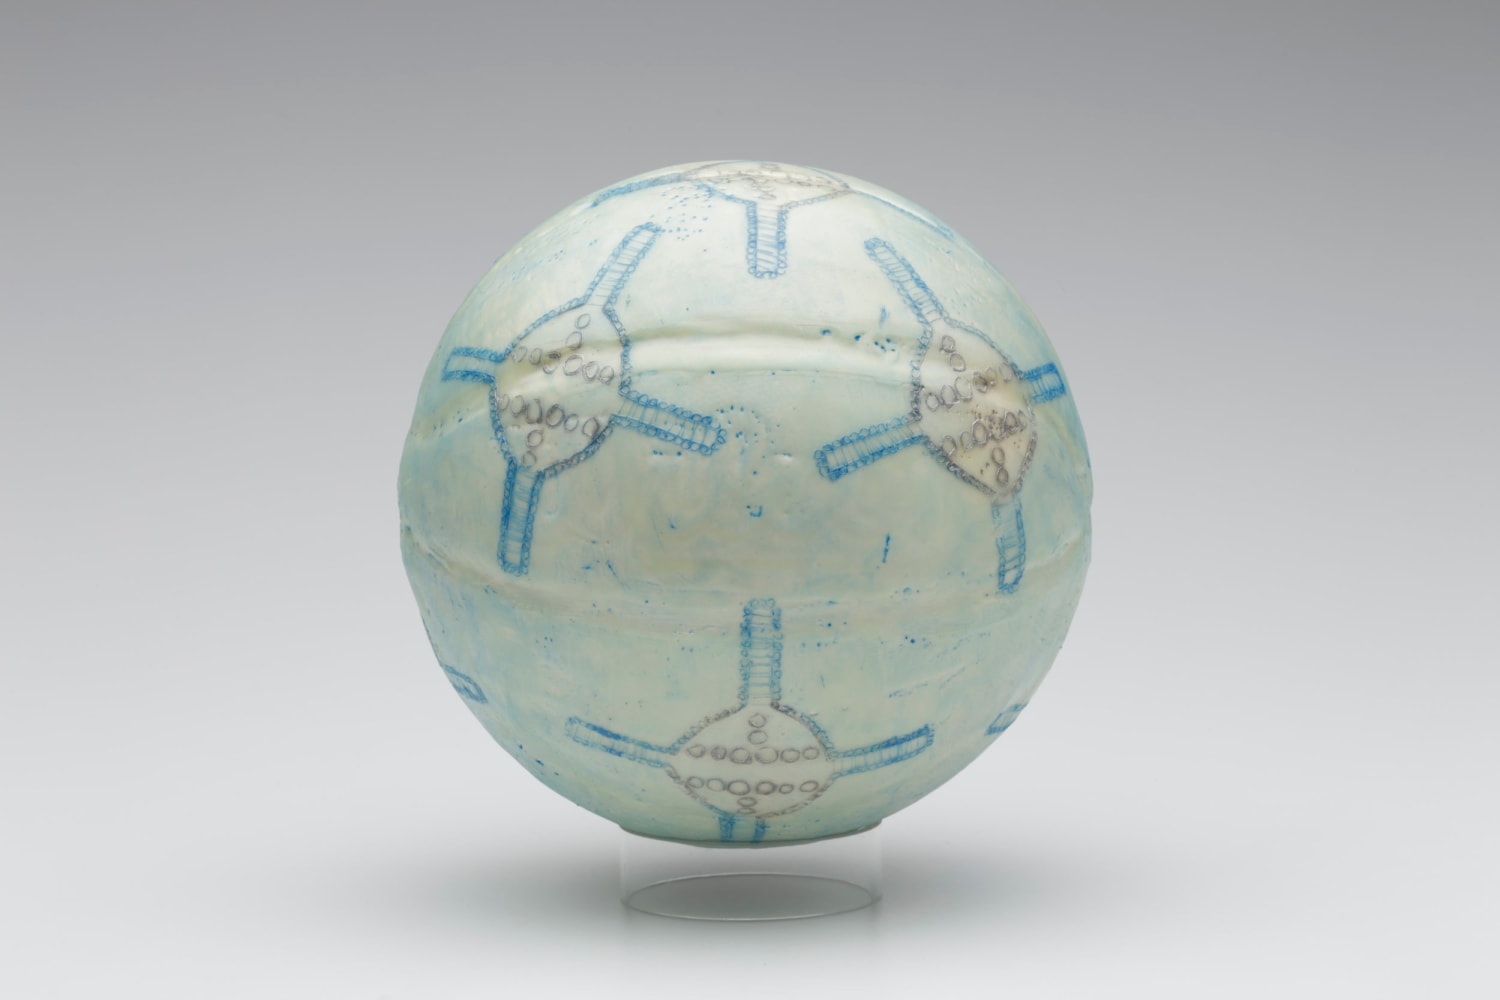 Gina Adams
Honoring Modern Spirit Remains 15, 2015
Oil and encaustic on ceramic
9 inches round
Courtesy of the Artist and Fort Gansevoort